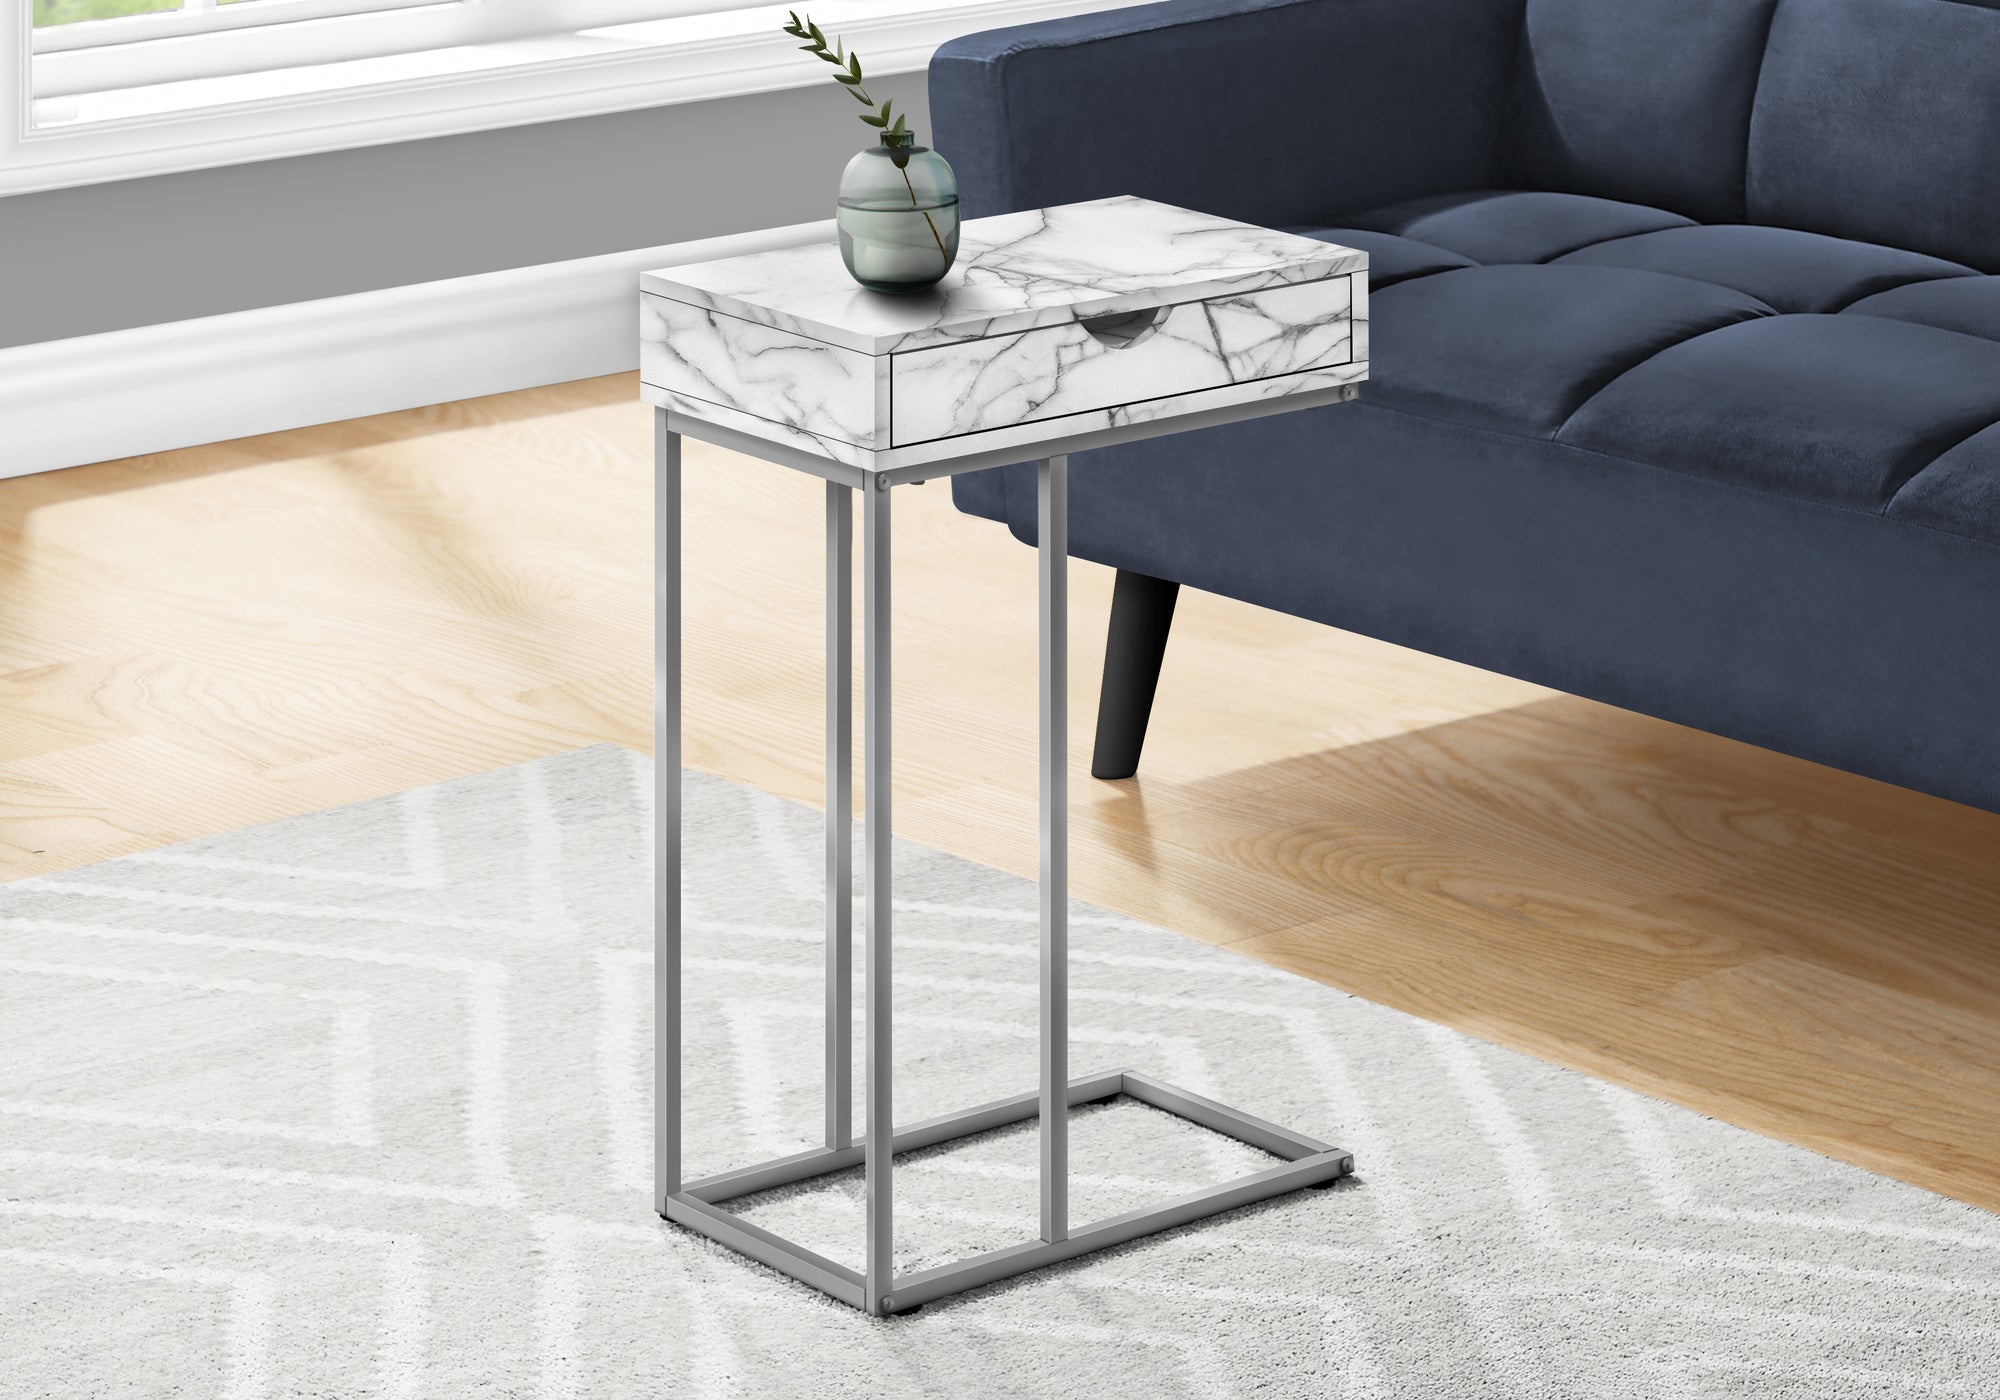 MN-493772    Side Table / C Table - 1 Storage Drawer, Pass-Through / Rectangular - 25"H - White Marble-Look  / Silver